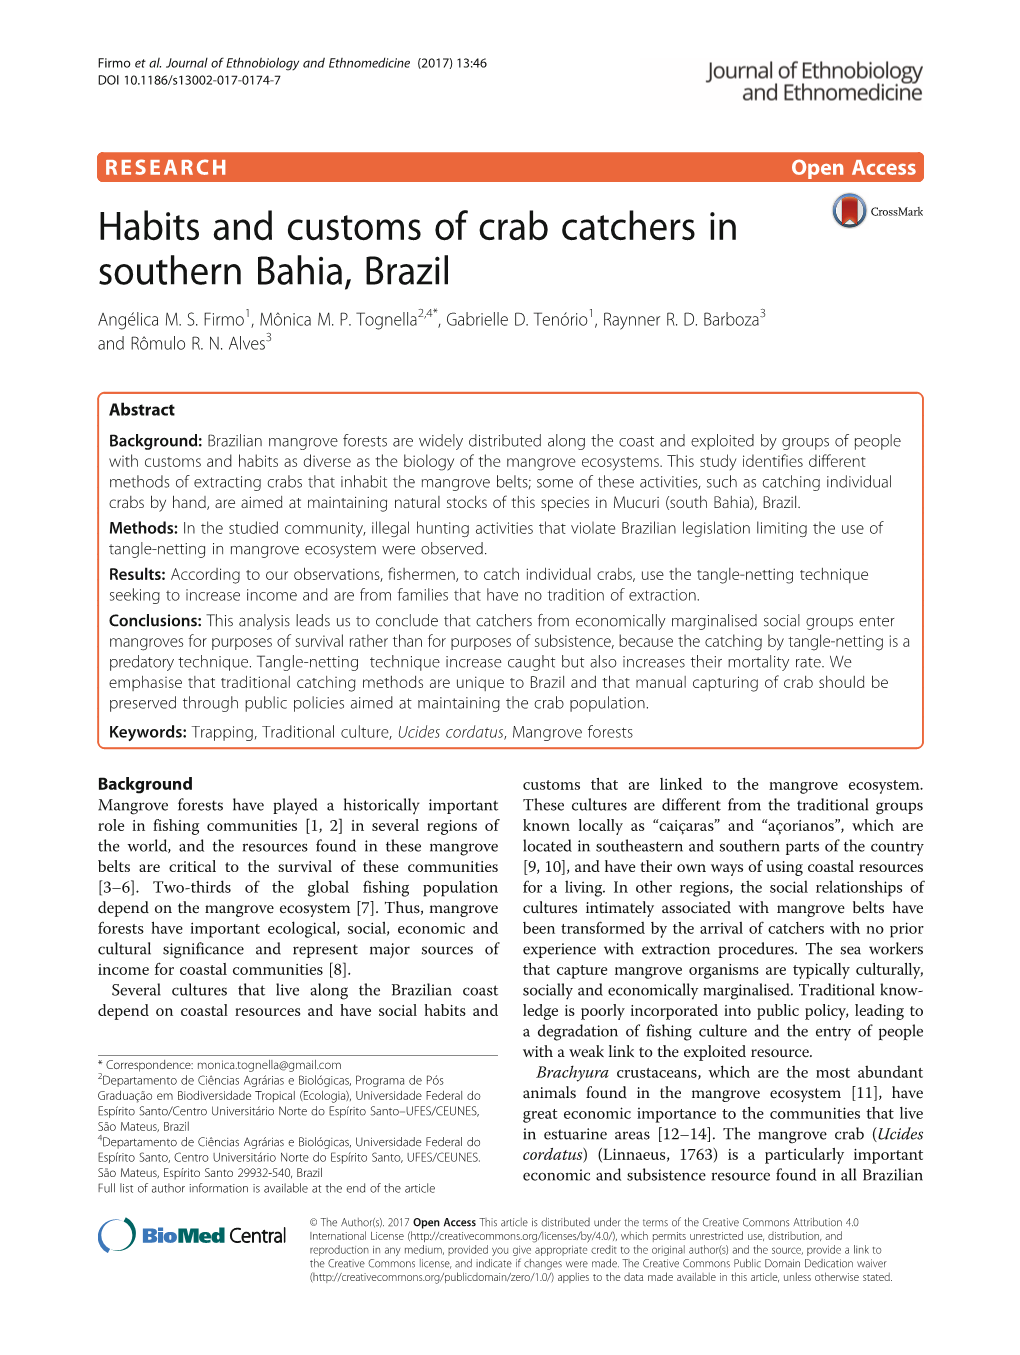 Habits and Customs of Crab Catchers in Southern Bahia, Brazil Angélica M